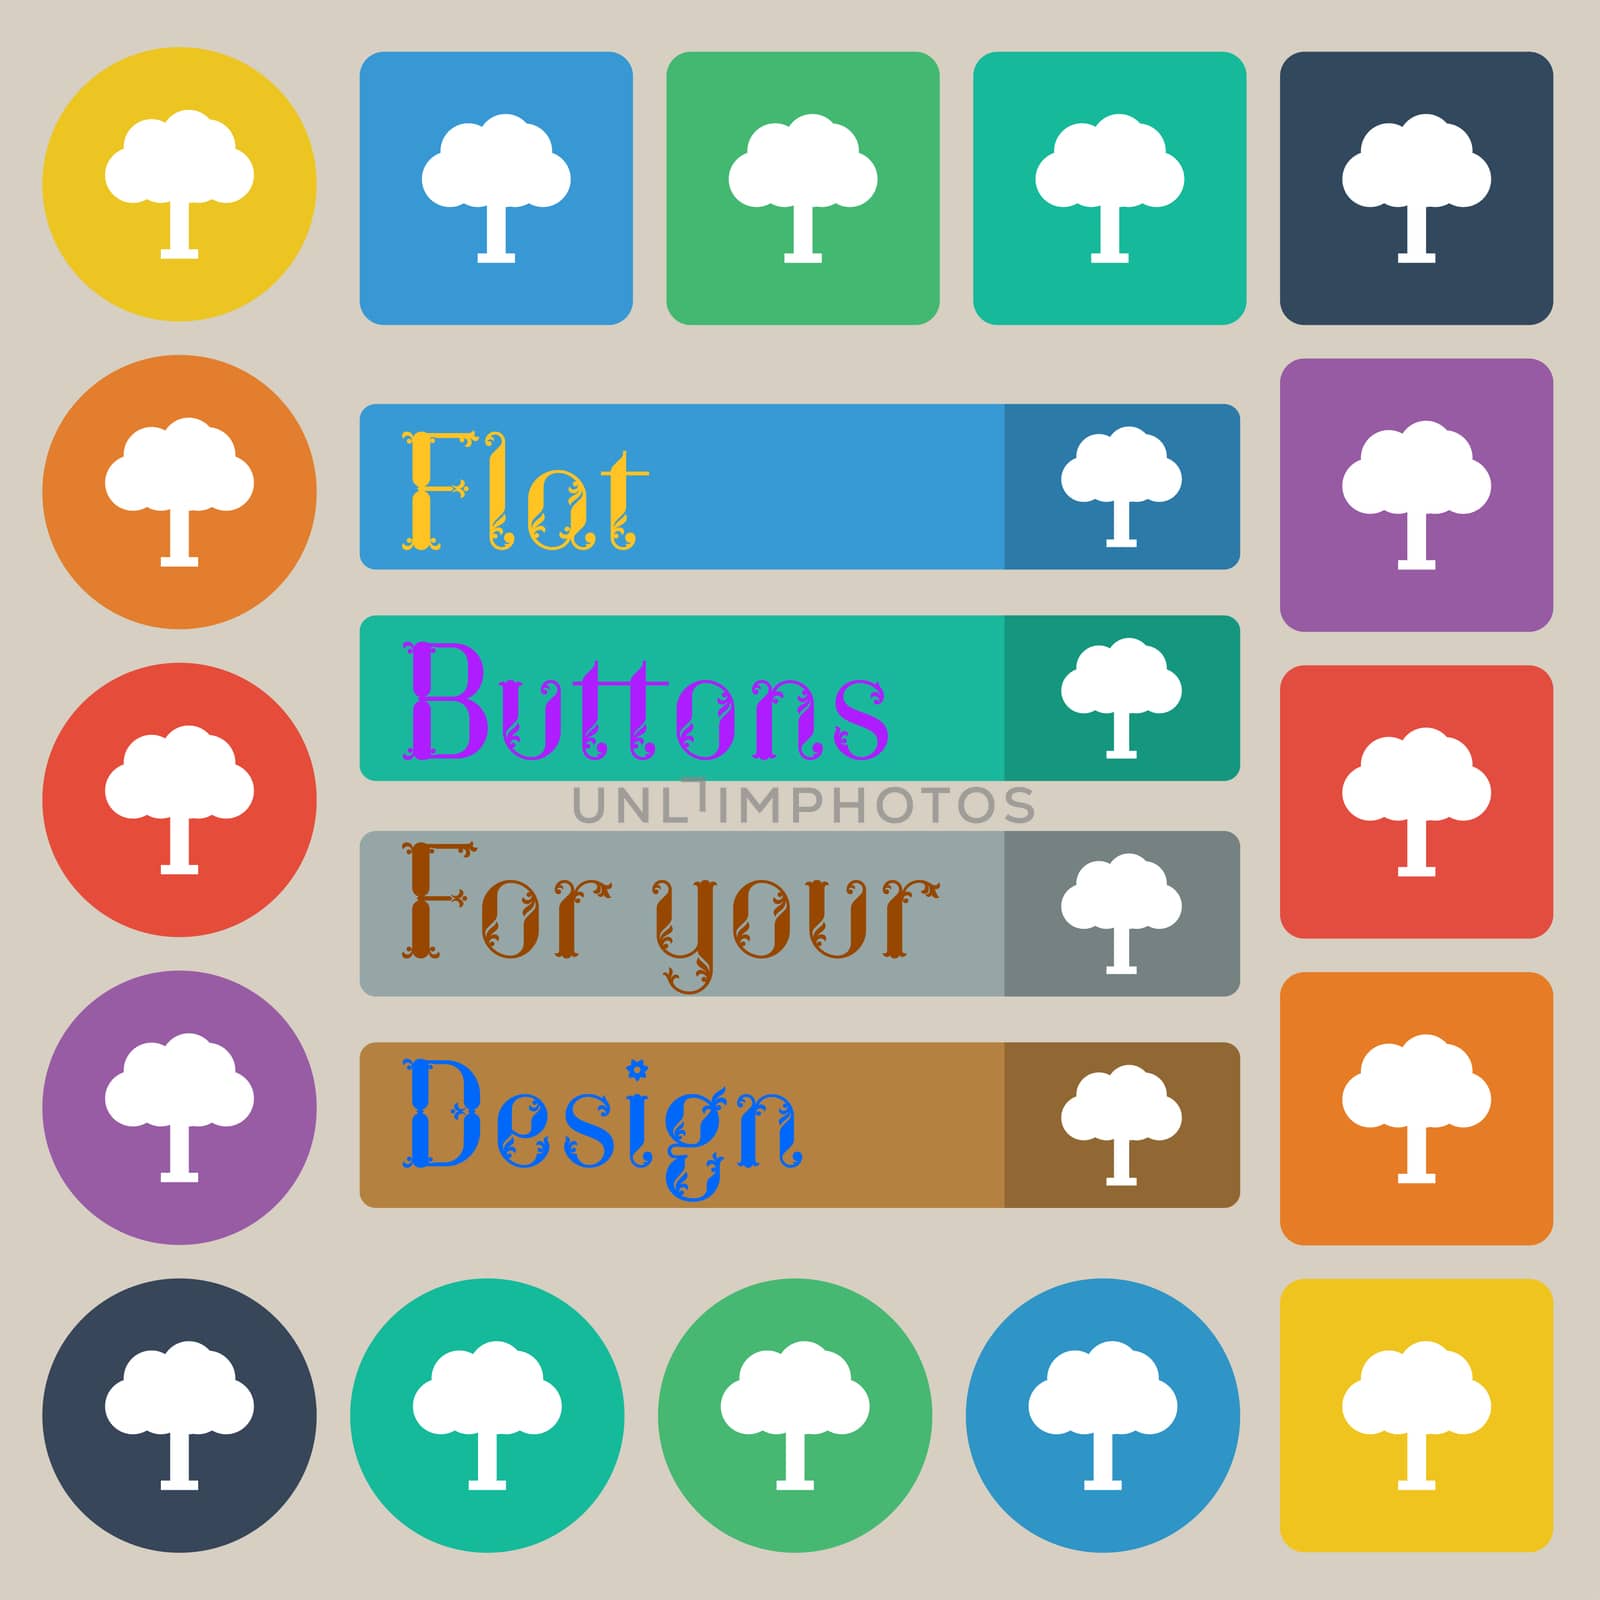 Tree, Forest icon sign. Set of twenty colored flat, round, square and rectangular buttons. illustration